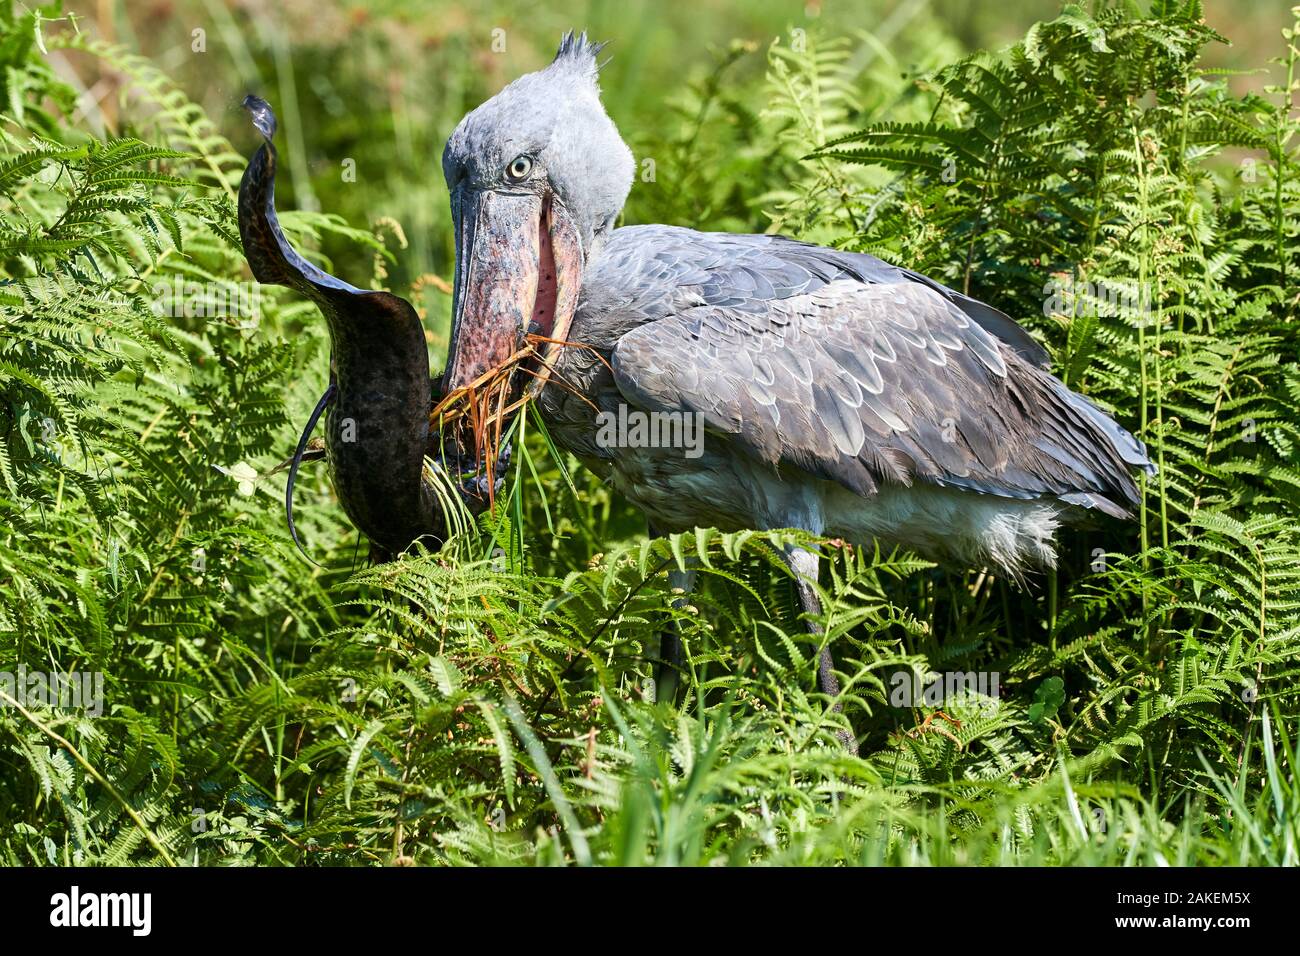 Shoebill stork (Balaeniceps rex) feeding on a Spotted African lungfish (Protopterus dolloi) in the swamps of Mabamba, Lake Victoria, Uganda. Stock Photo